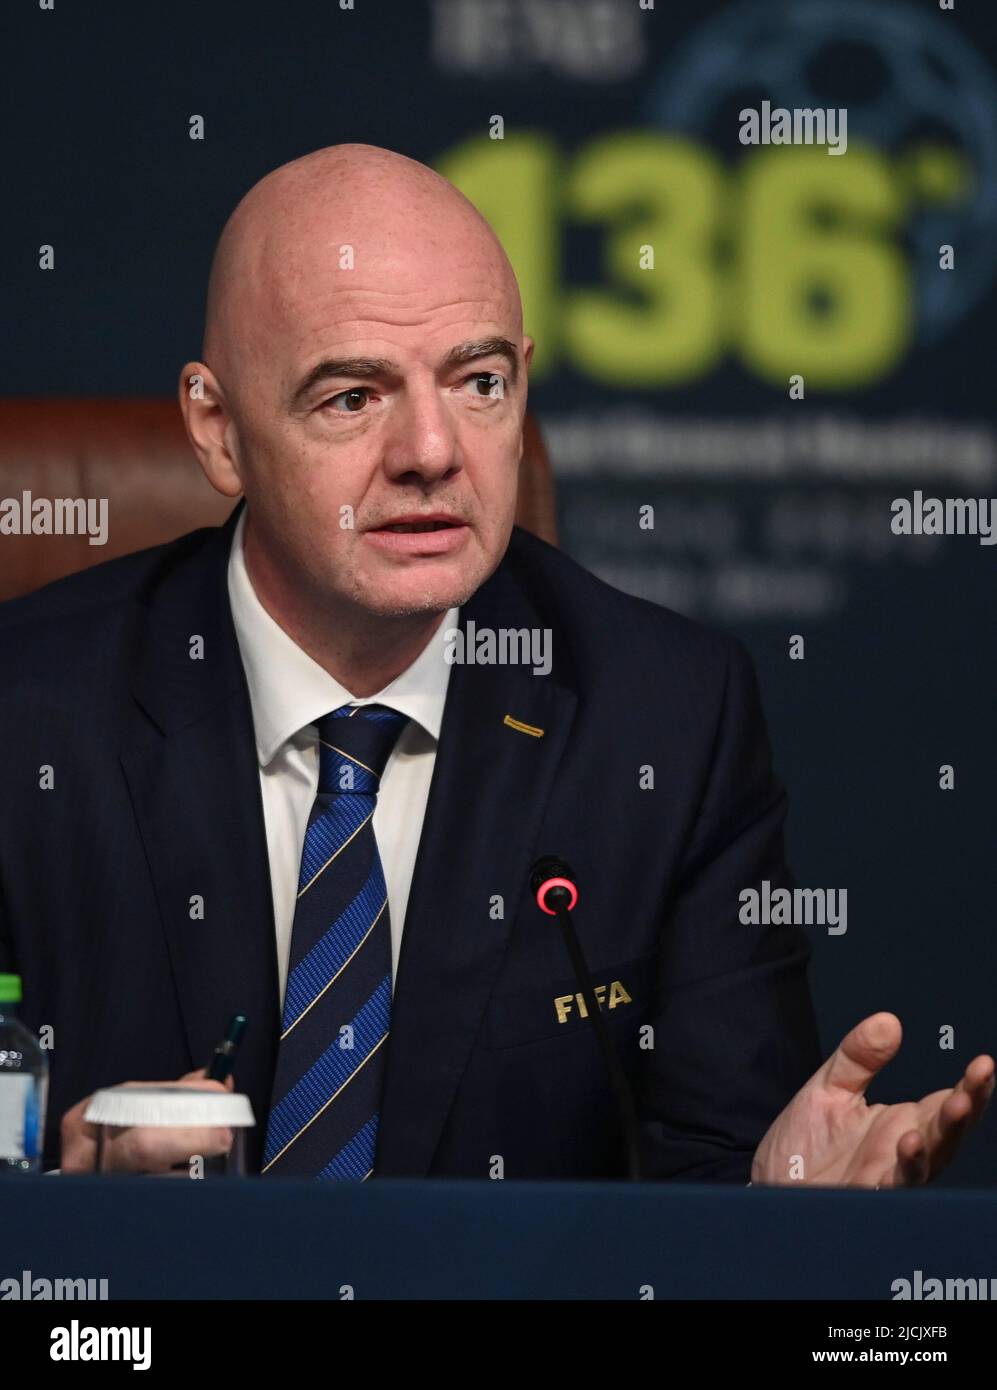 Doha, Qatar. 13th June, 2022. FIFA President Gianni Infantino speaks during a press conference for the 136th annual general meeting of the International Football Association Board (IFAB) in Doha, capital of Qatar, June 13, 2022. Credit: Nikku/Xinhua/Alamy Live News Stock Photo